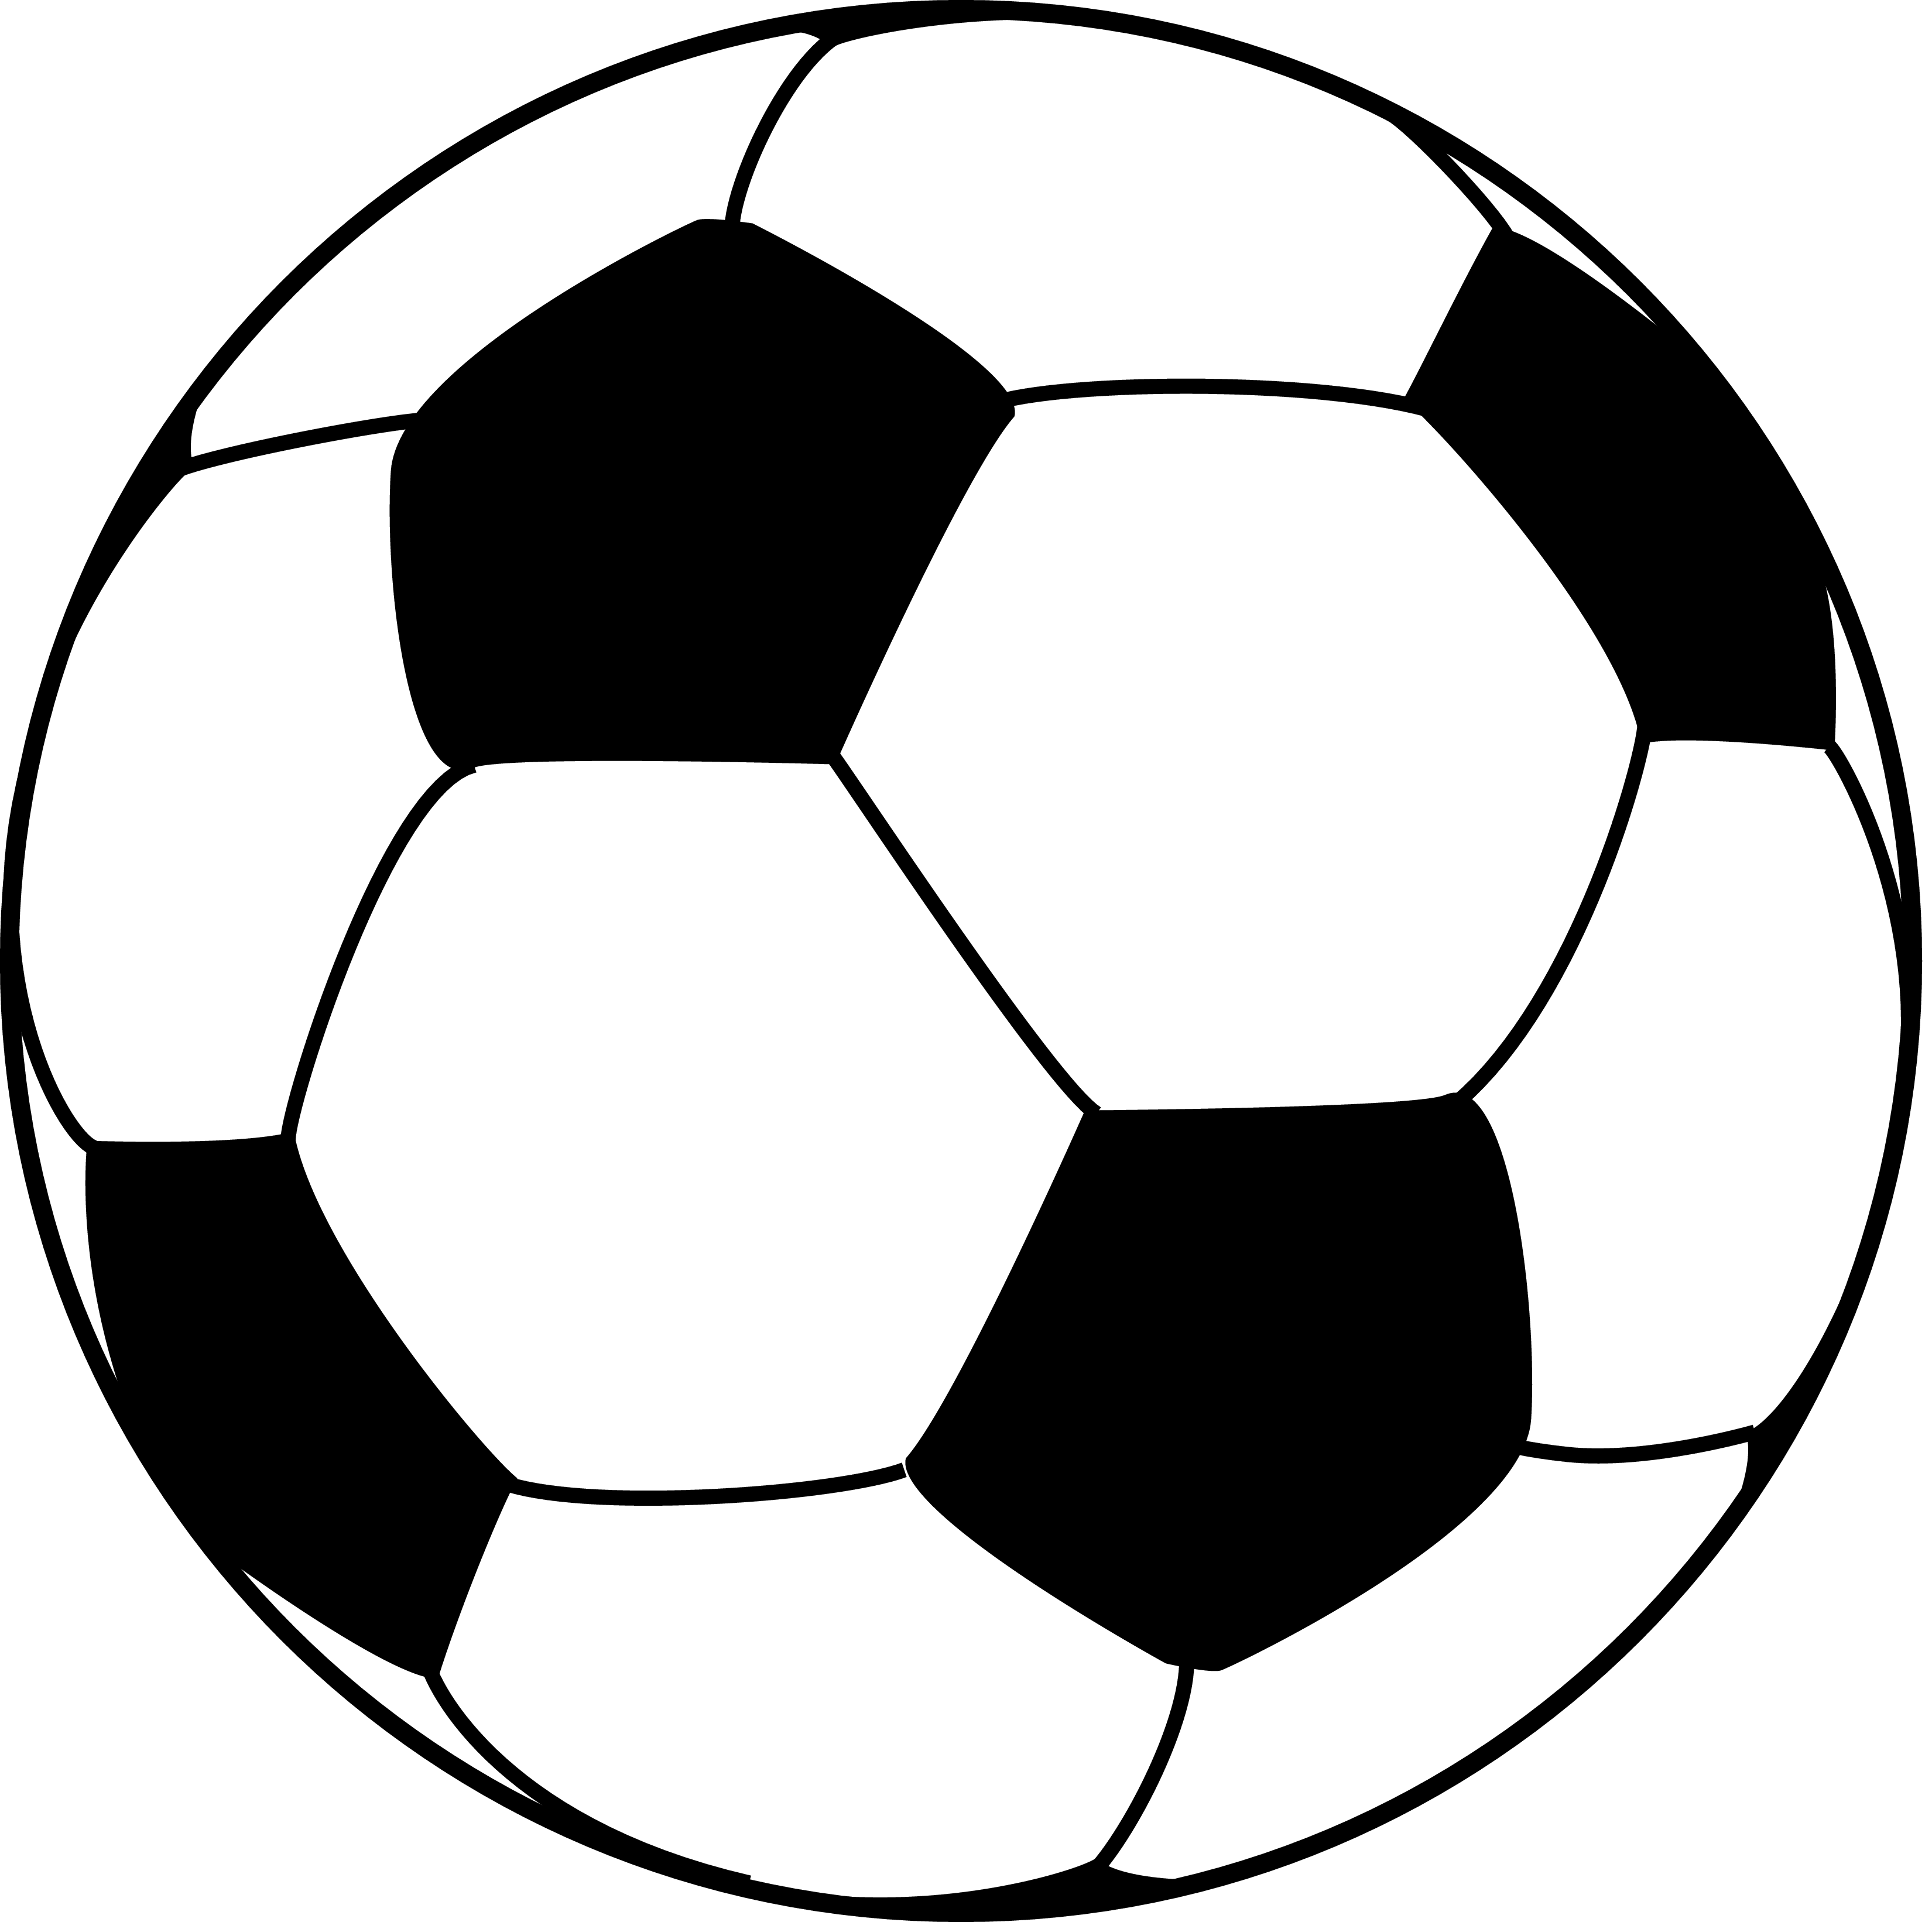 Ball drawing easy at. Clipart clothes soccer